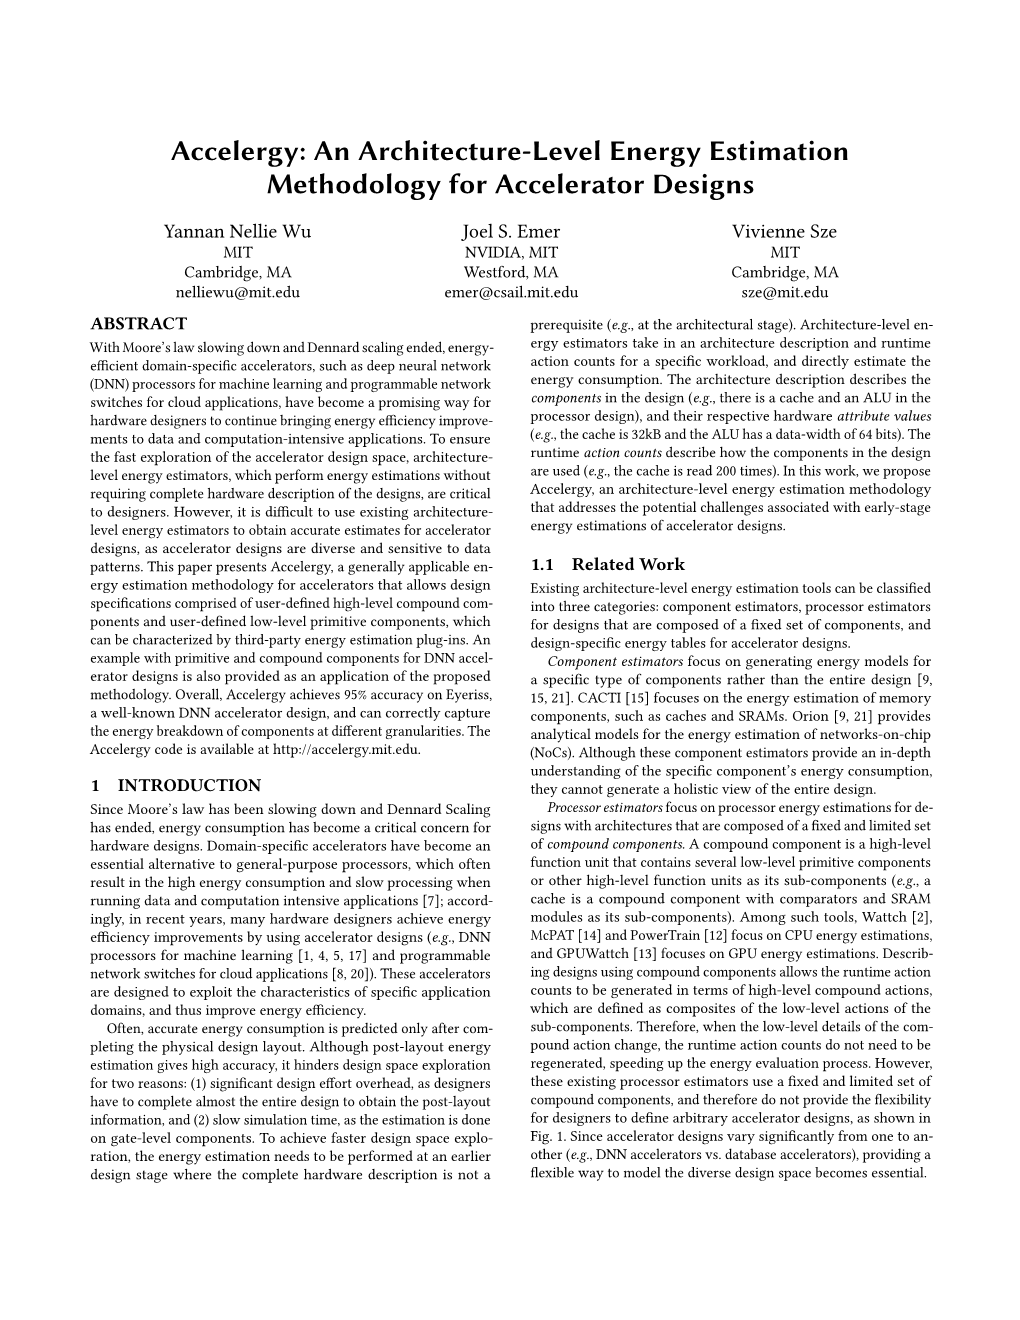 An Architecture-Level Energy Estimation Methodology for Accelerator Designs